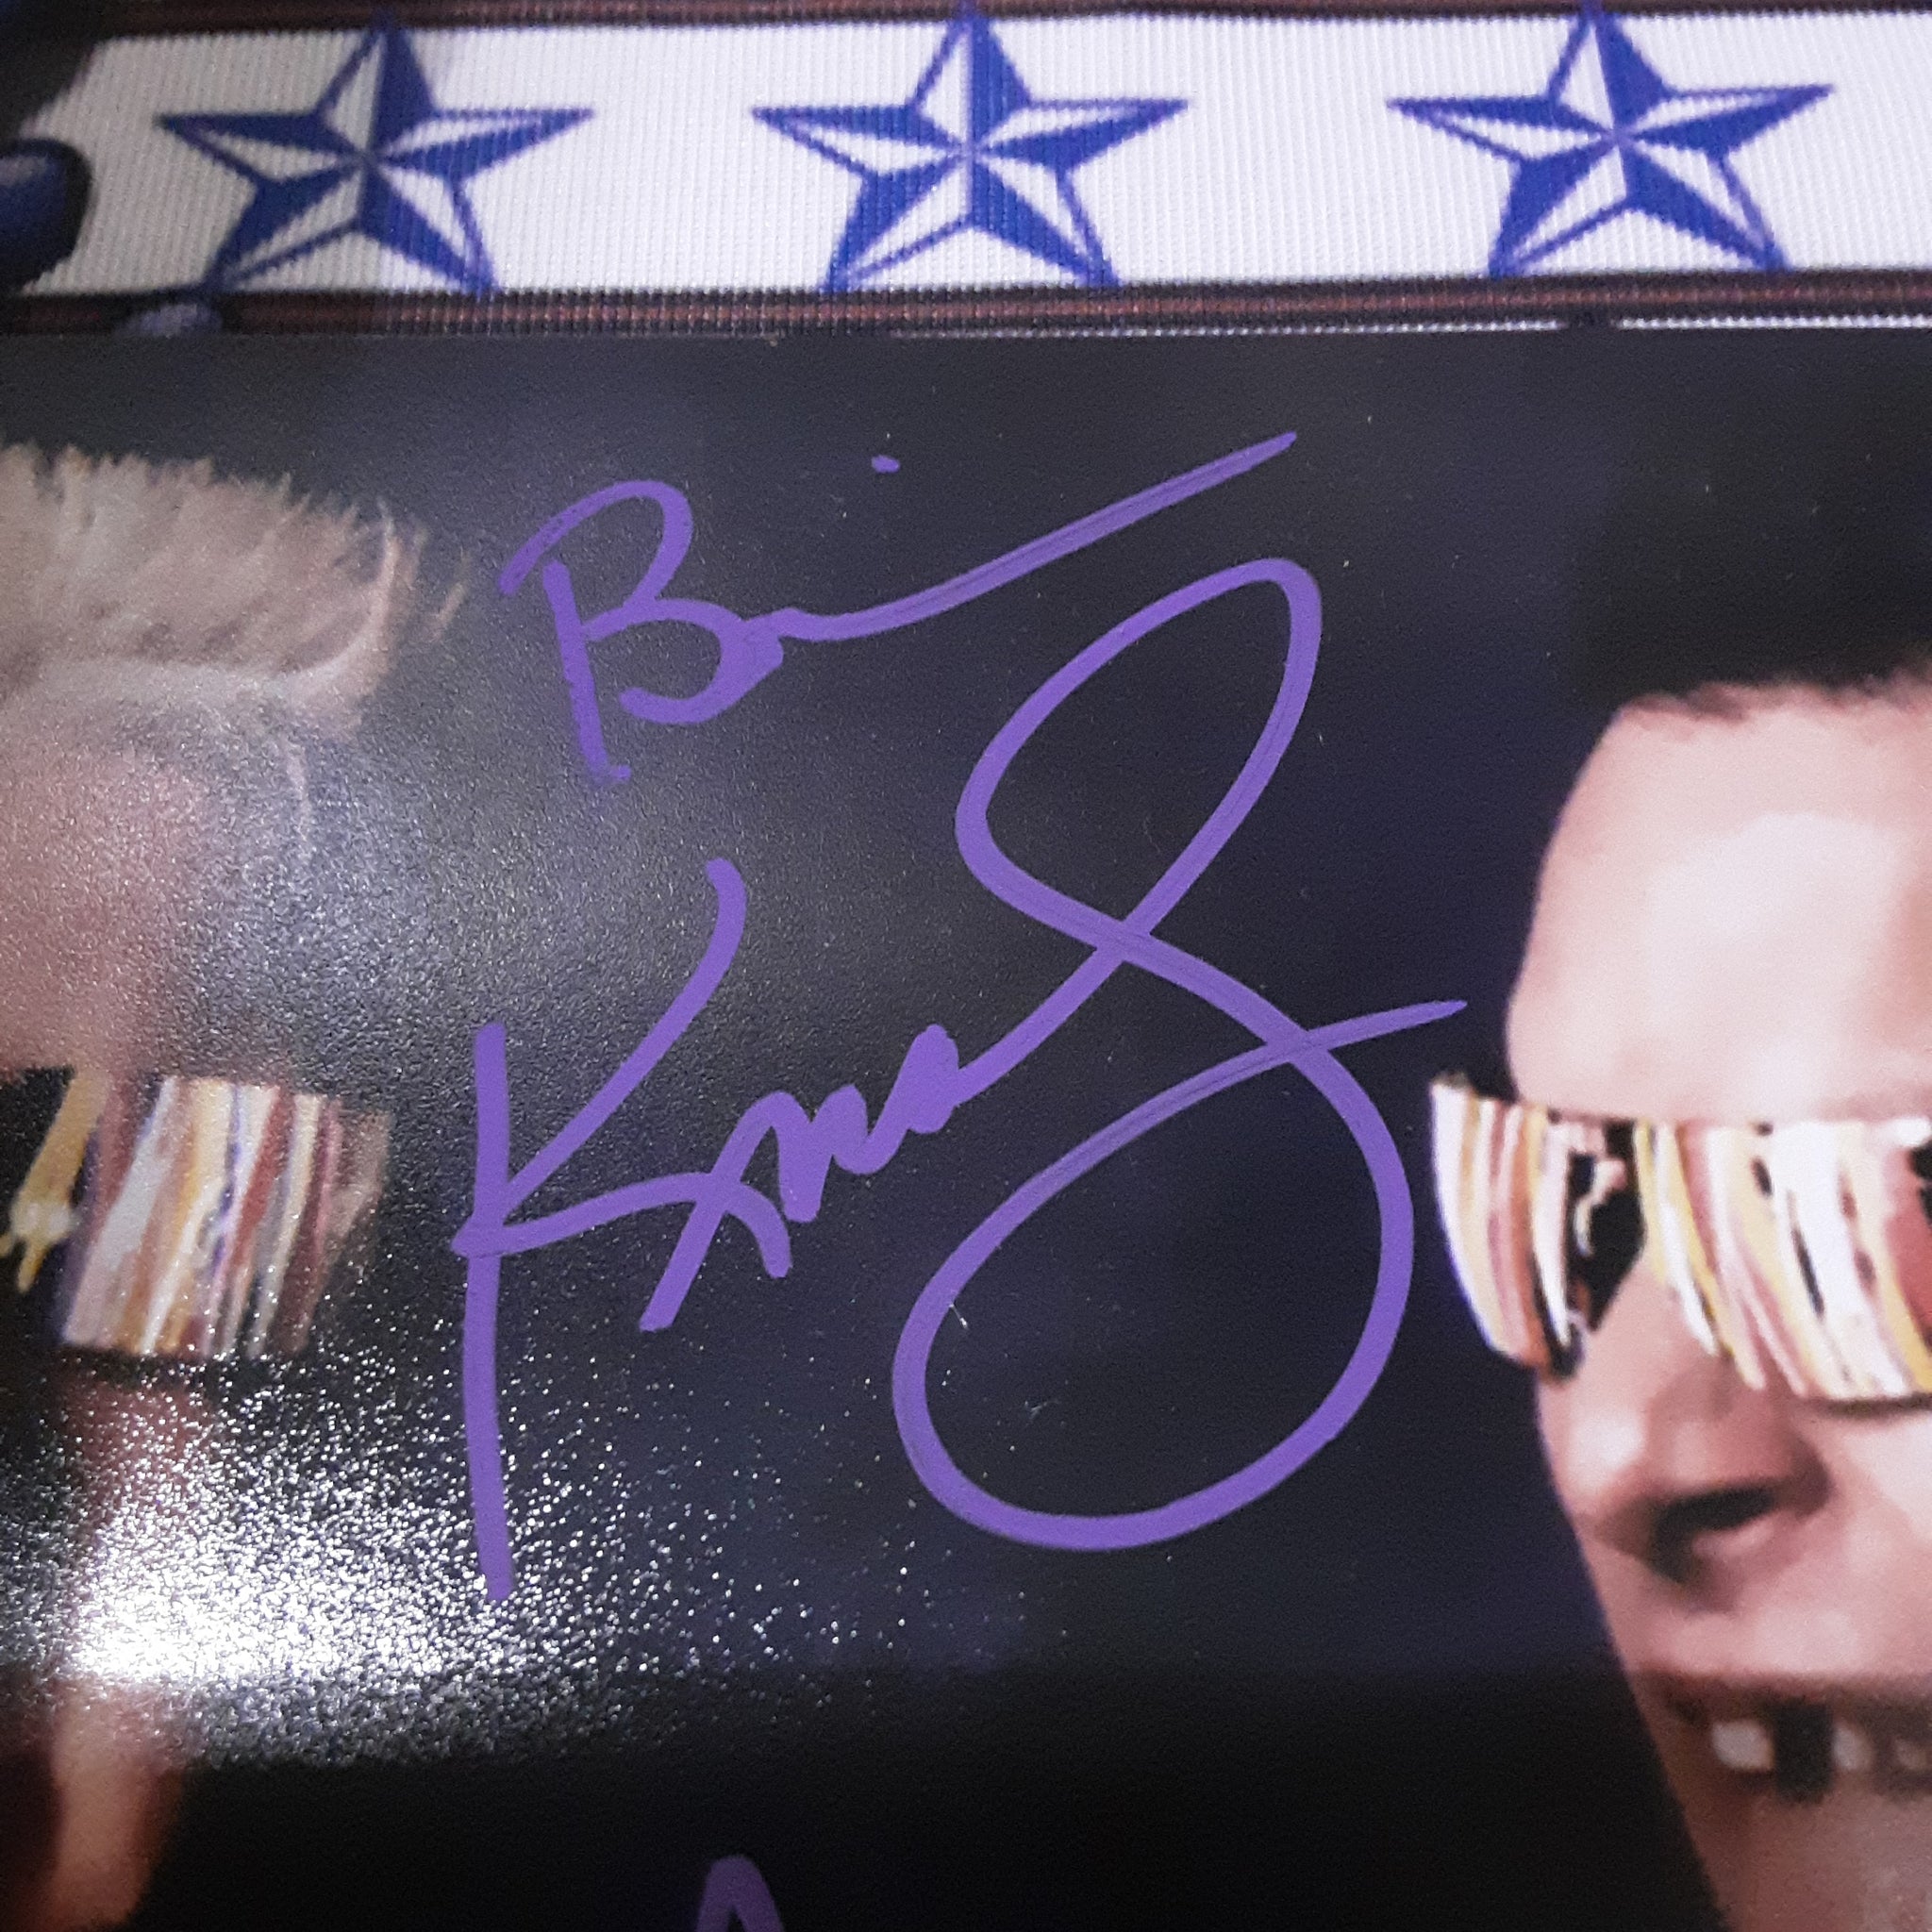 Brian Knobbs and Jerry Sags Autographed Authentic Signed 8x10 Photo Autographed JSA.